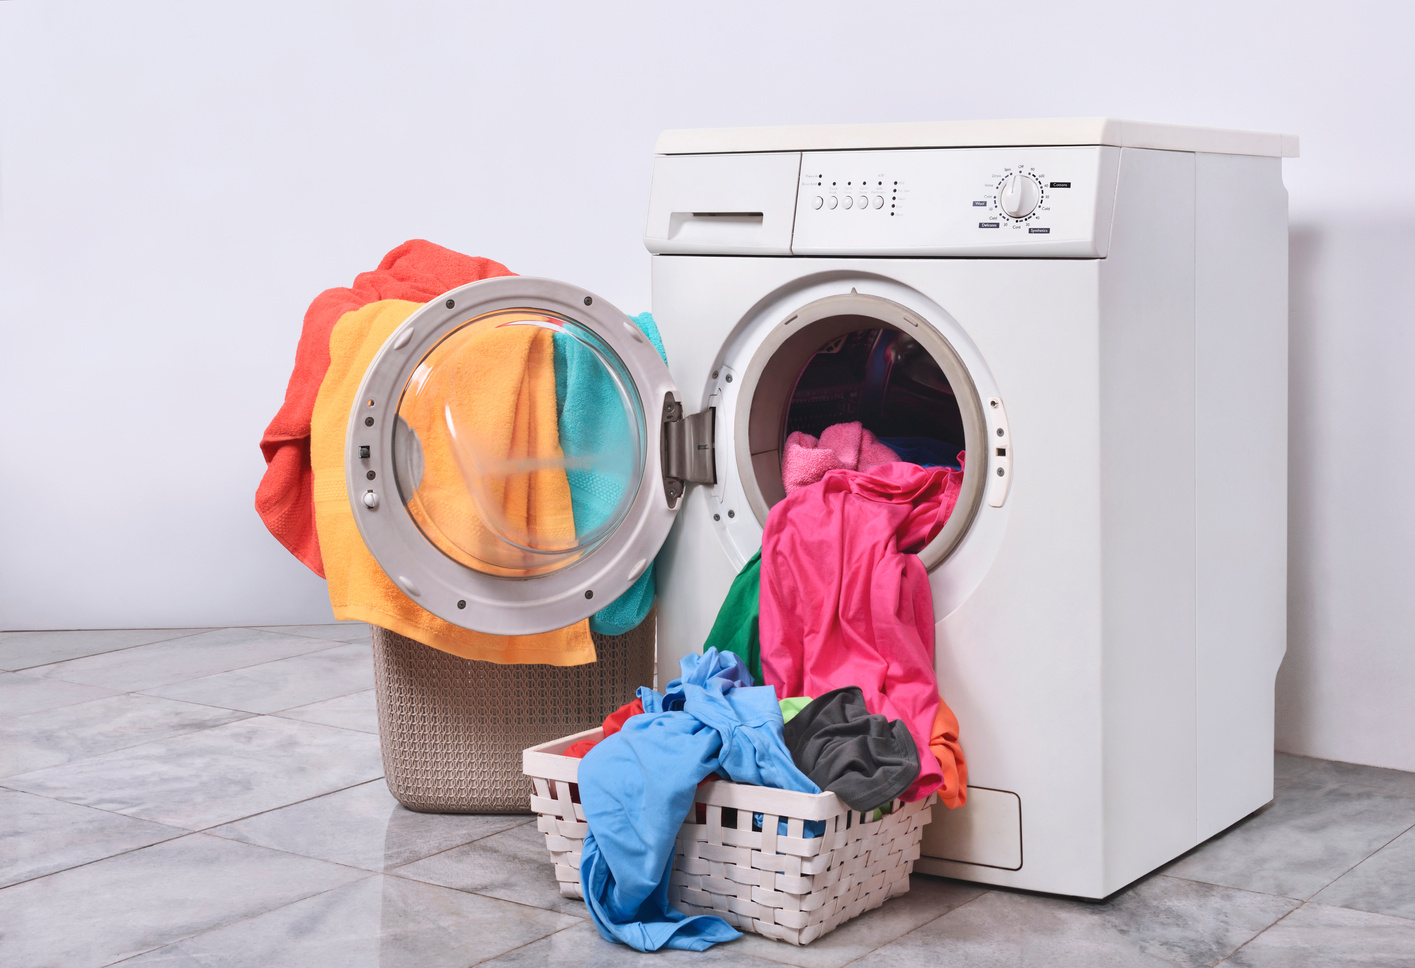 Clothes ready to wash with washing machine